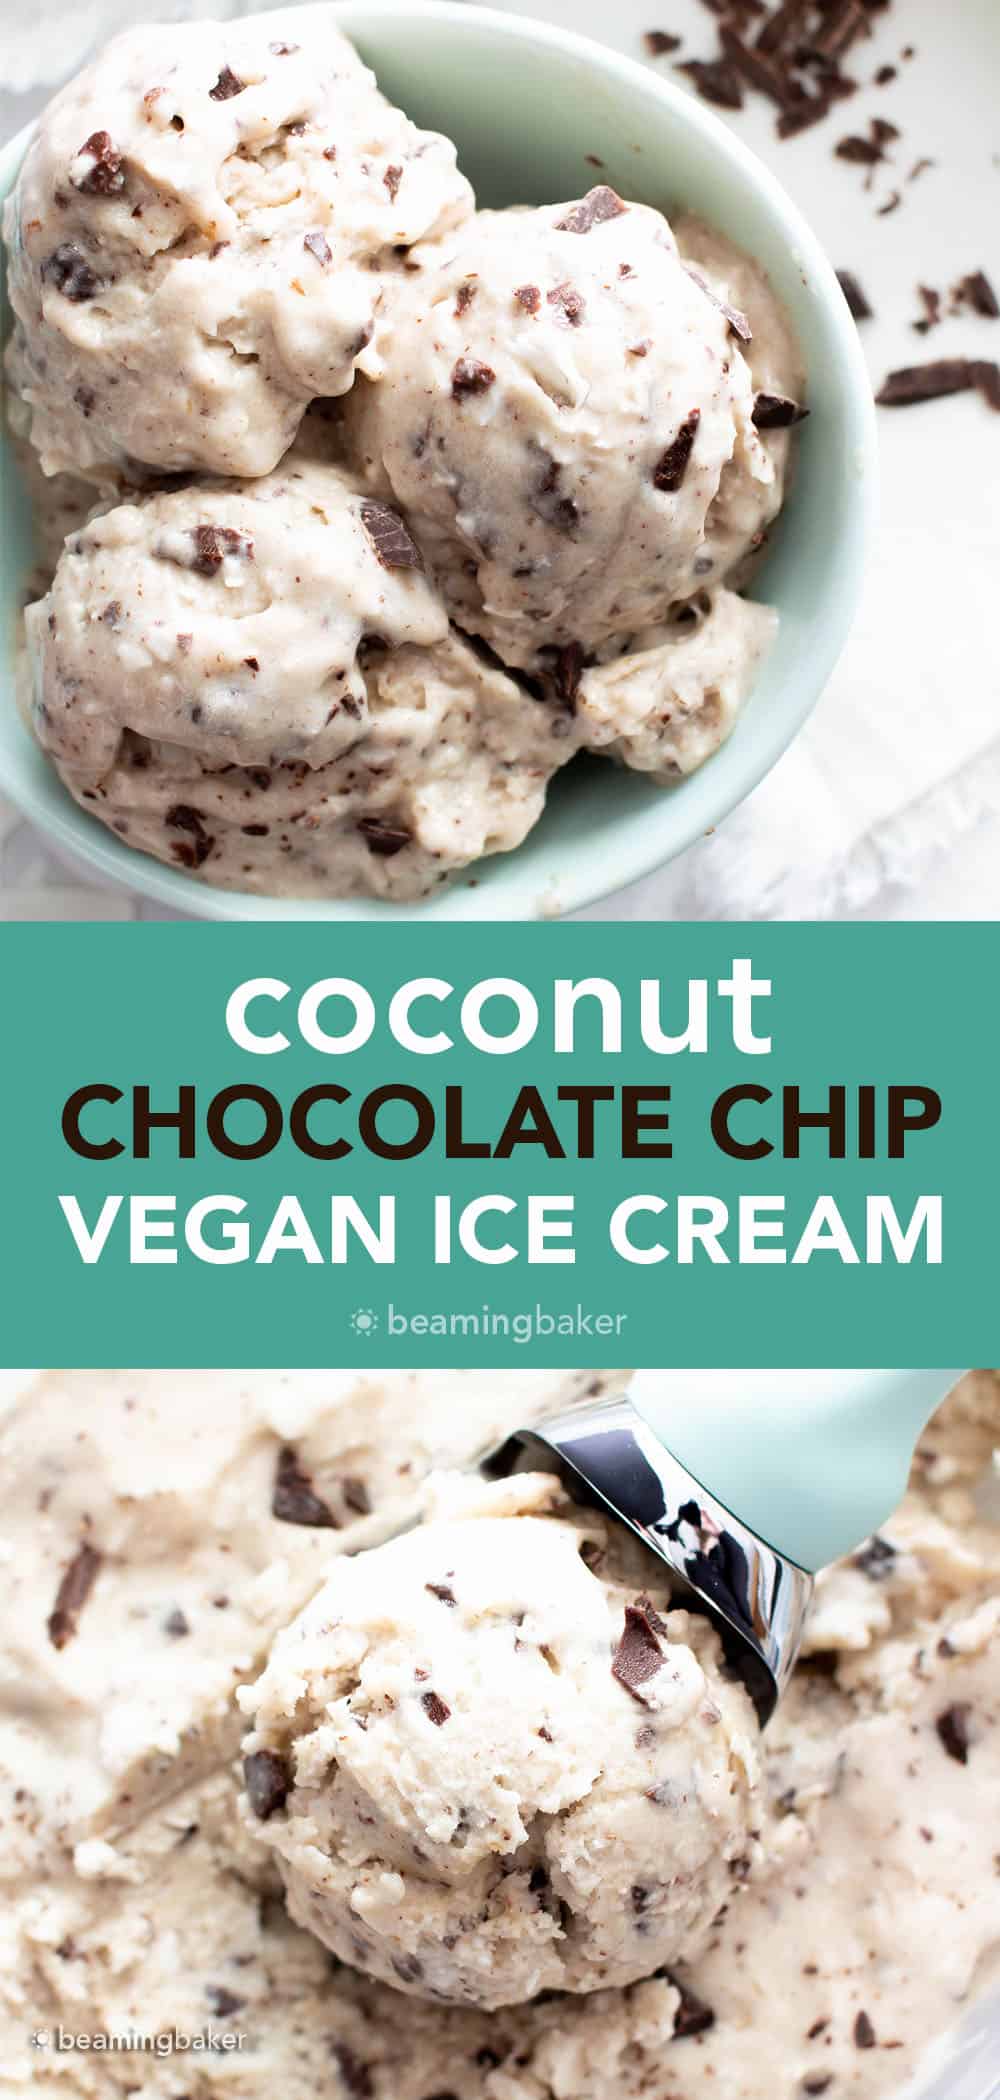 Coconut Chocolate Chip Vegan Ice Cream Recipe: this delicious vegan ice cream recipe is deliciously rich ‘n creamy! The best homemade vegan ice cream—packed with coconut & chocolate chips, no churn. #Vegan #IceCream #Coconut #ChocolateChip #VeganIceCream | Recipe at BeamingBaker.com